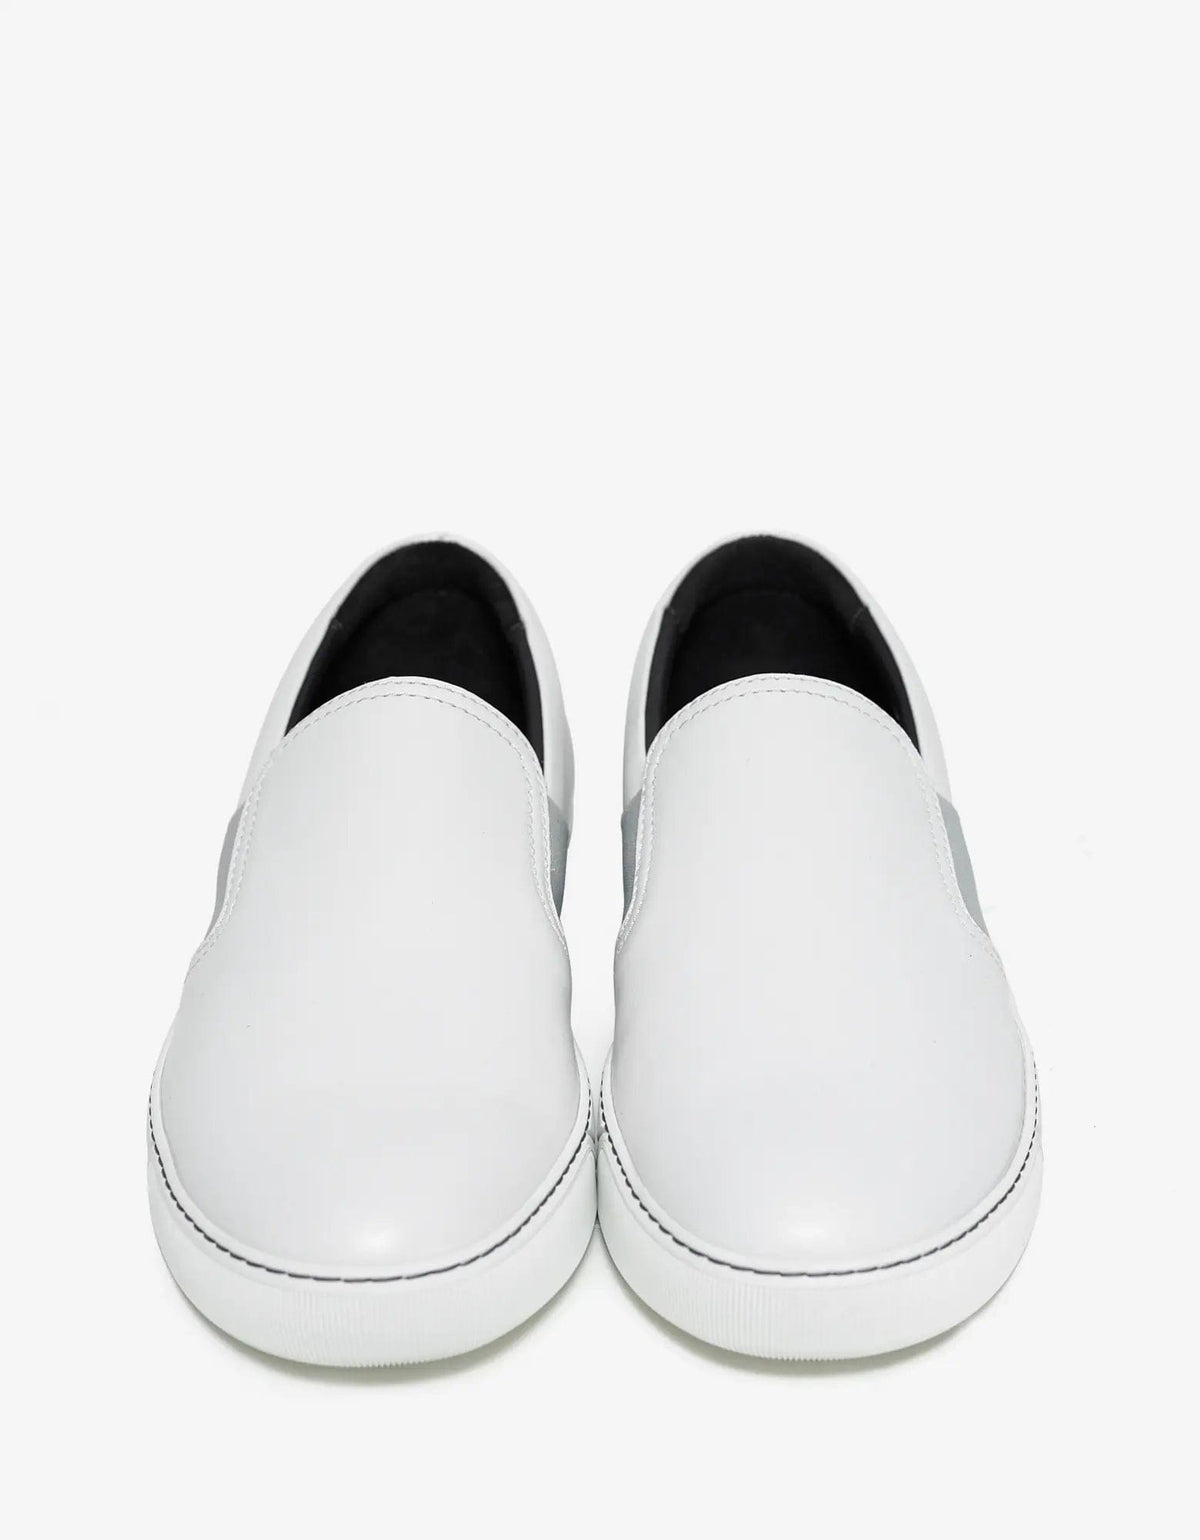 Lanvin Lanvin Aged White Leather Slip On Trainers